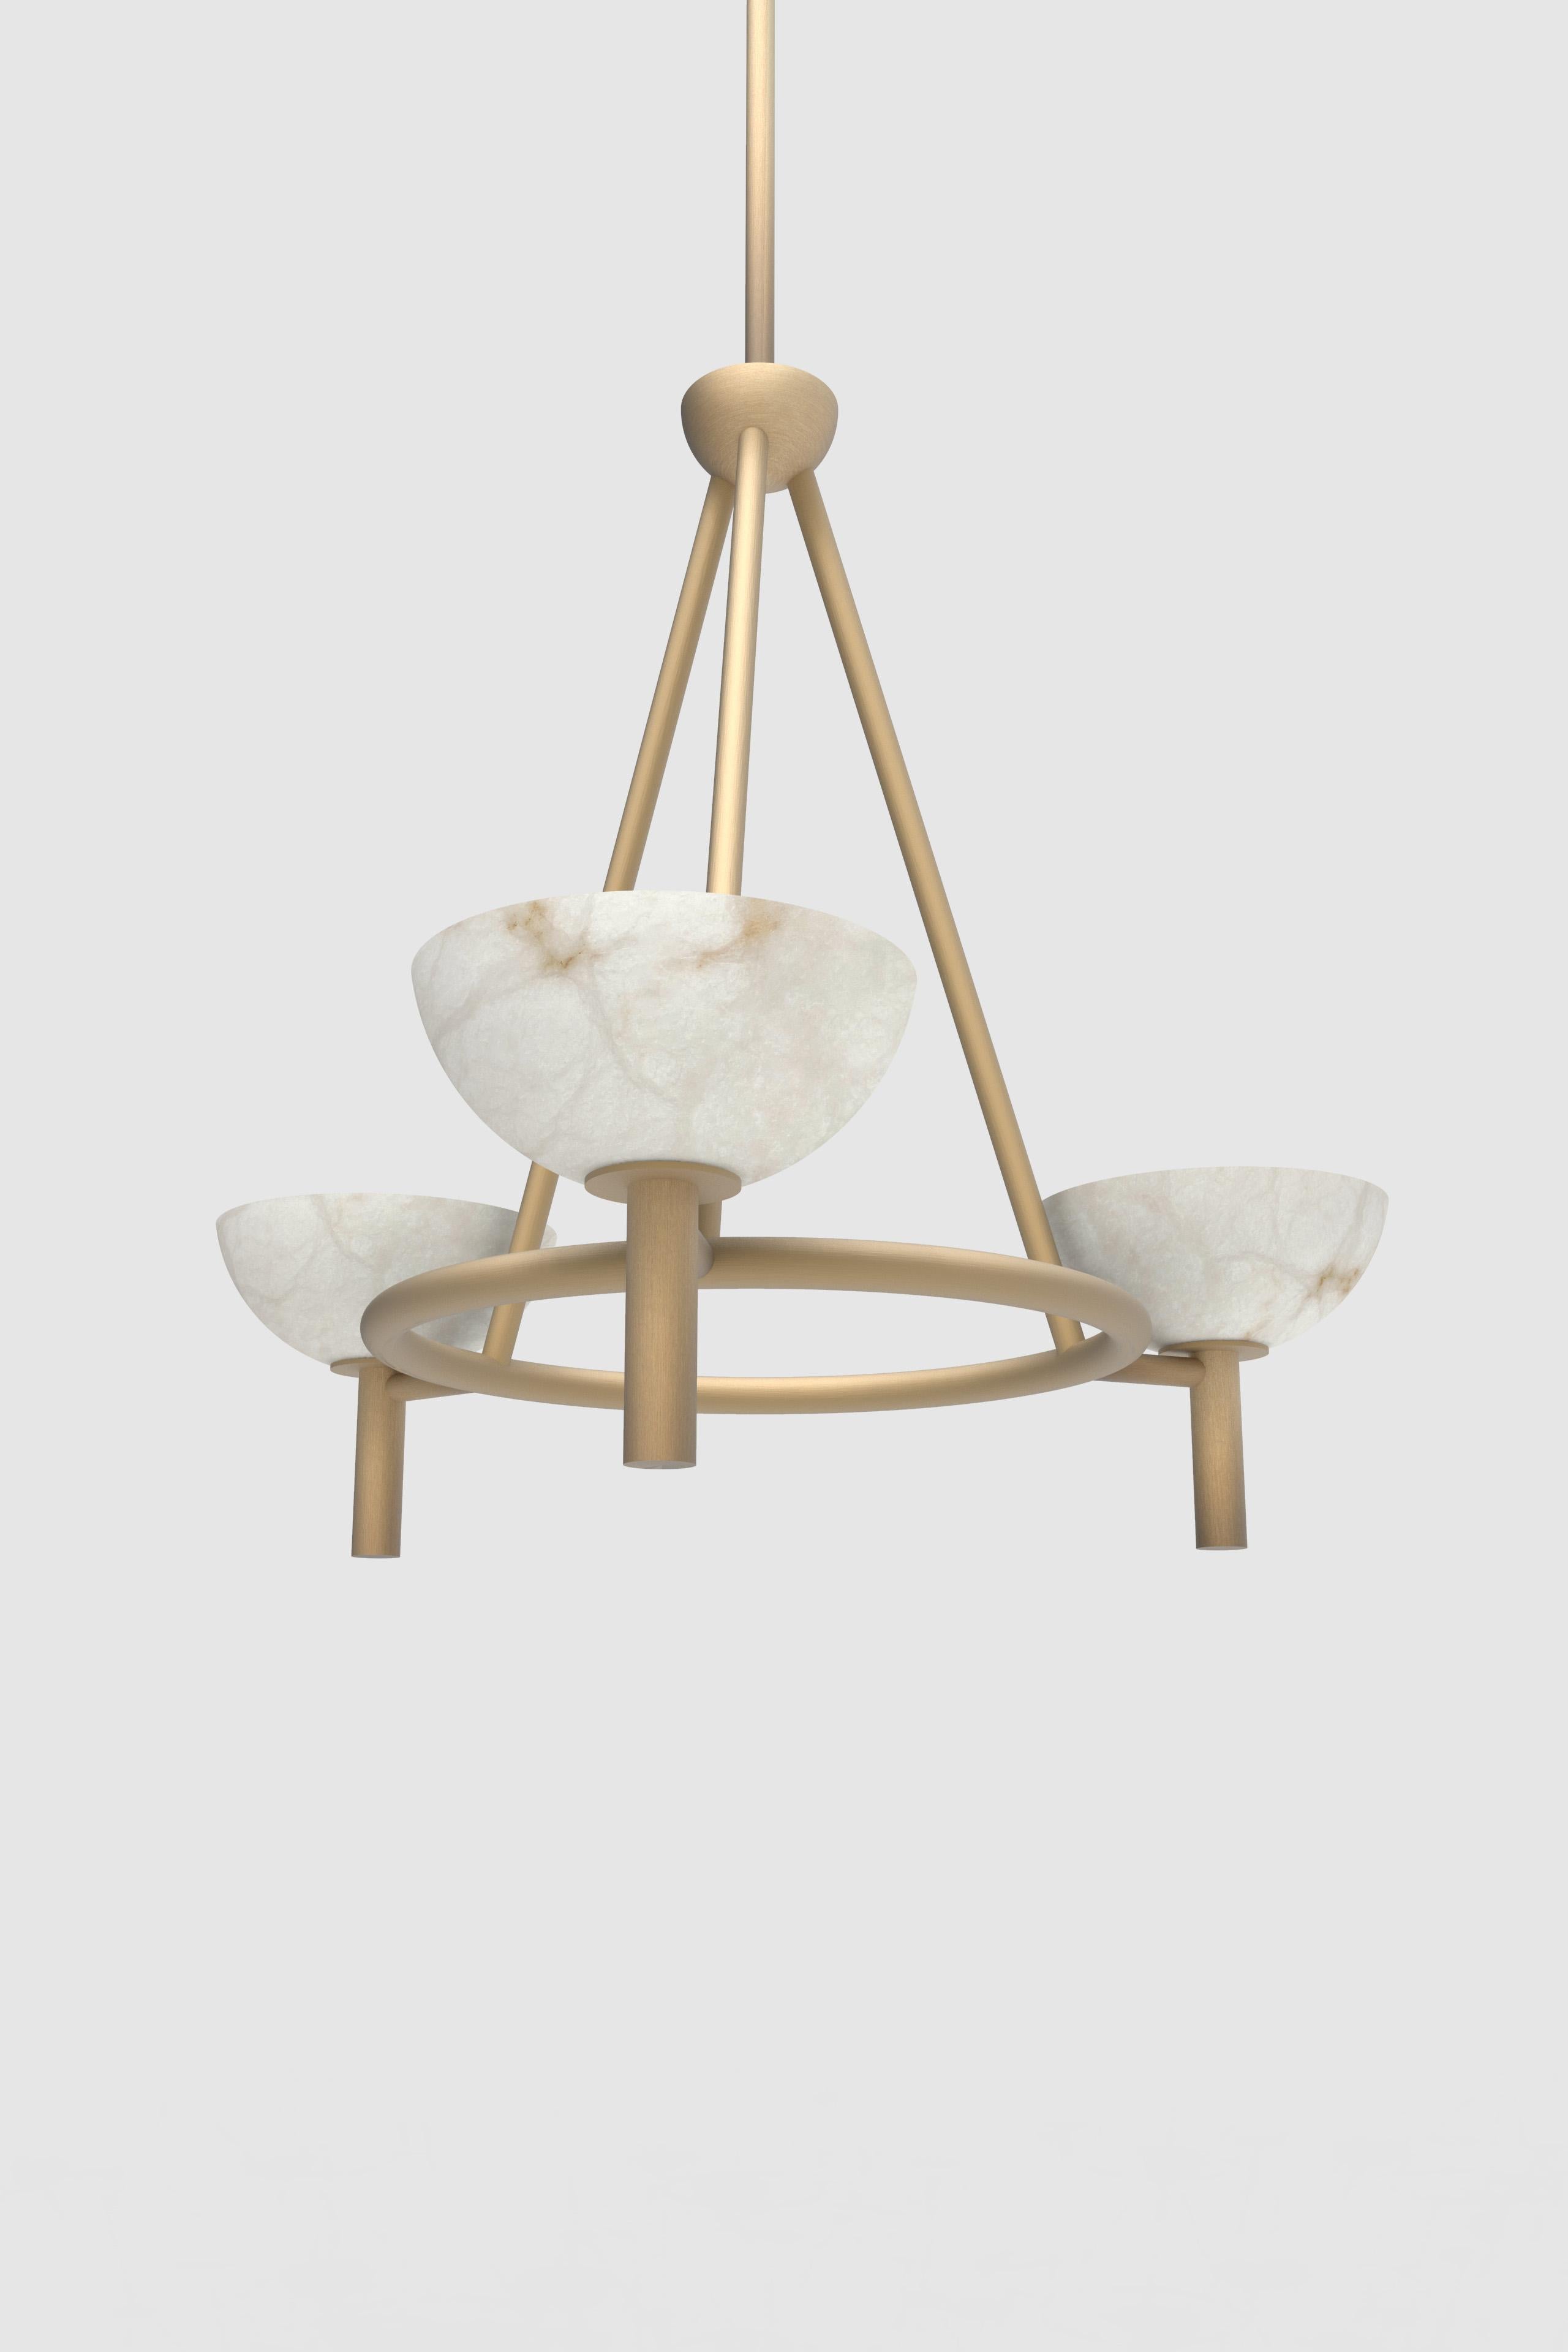 Orphan Work 200A Chandelier BB
Shown in alabaster with brushed brass
Available in brushed brass and blackened brass
Measures: 34” diameter x 24” height
Height to order
UL approved
Holds (3) 60W candelabra bulb
Must use LED bulb 
Uplight with